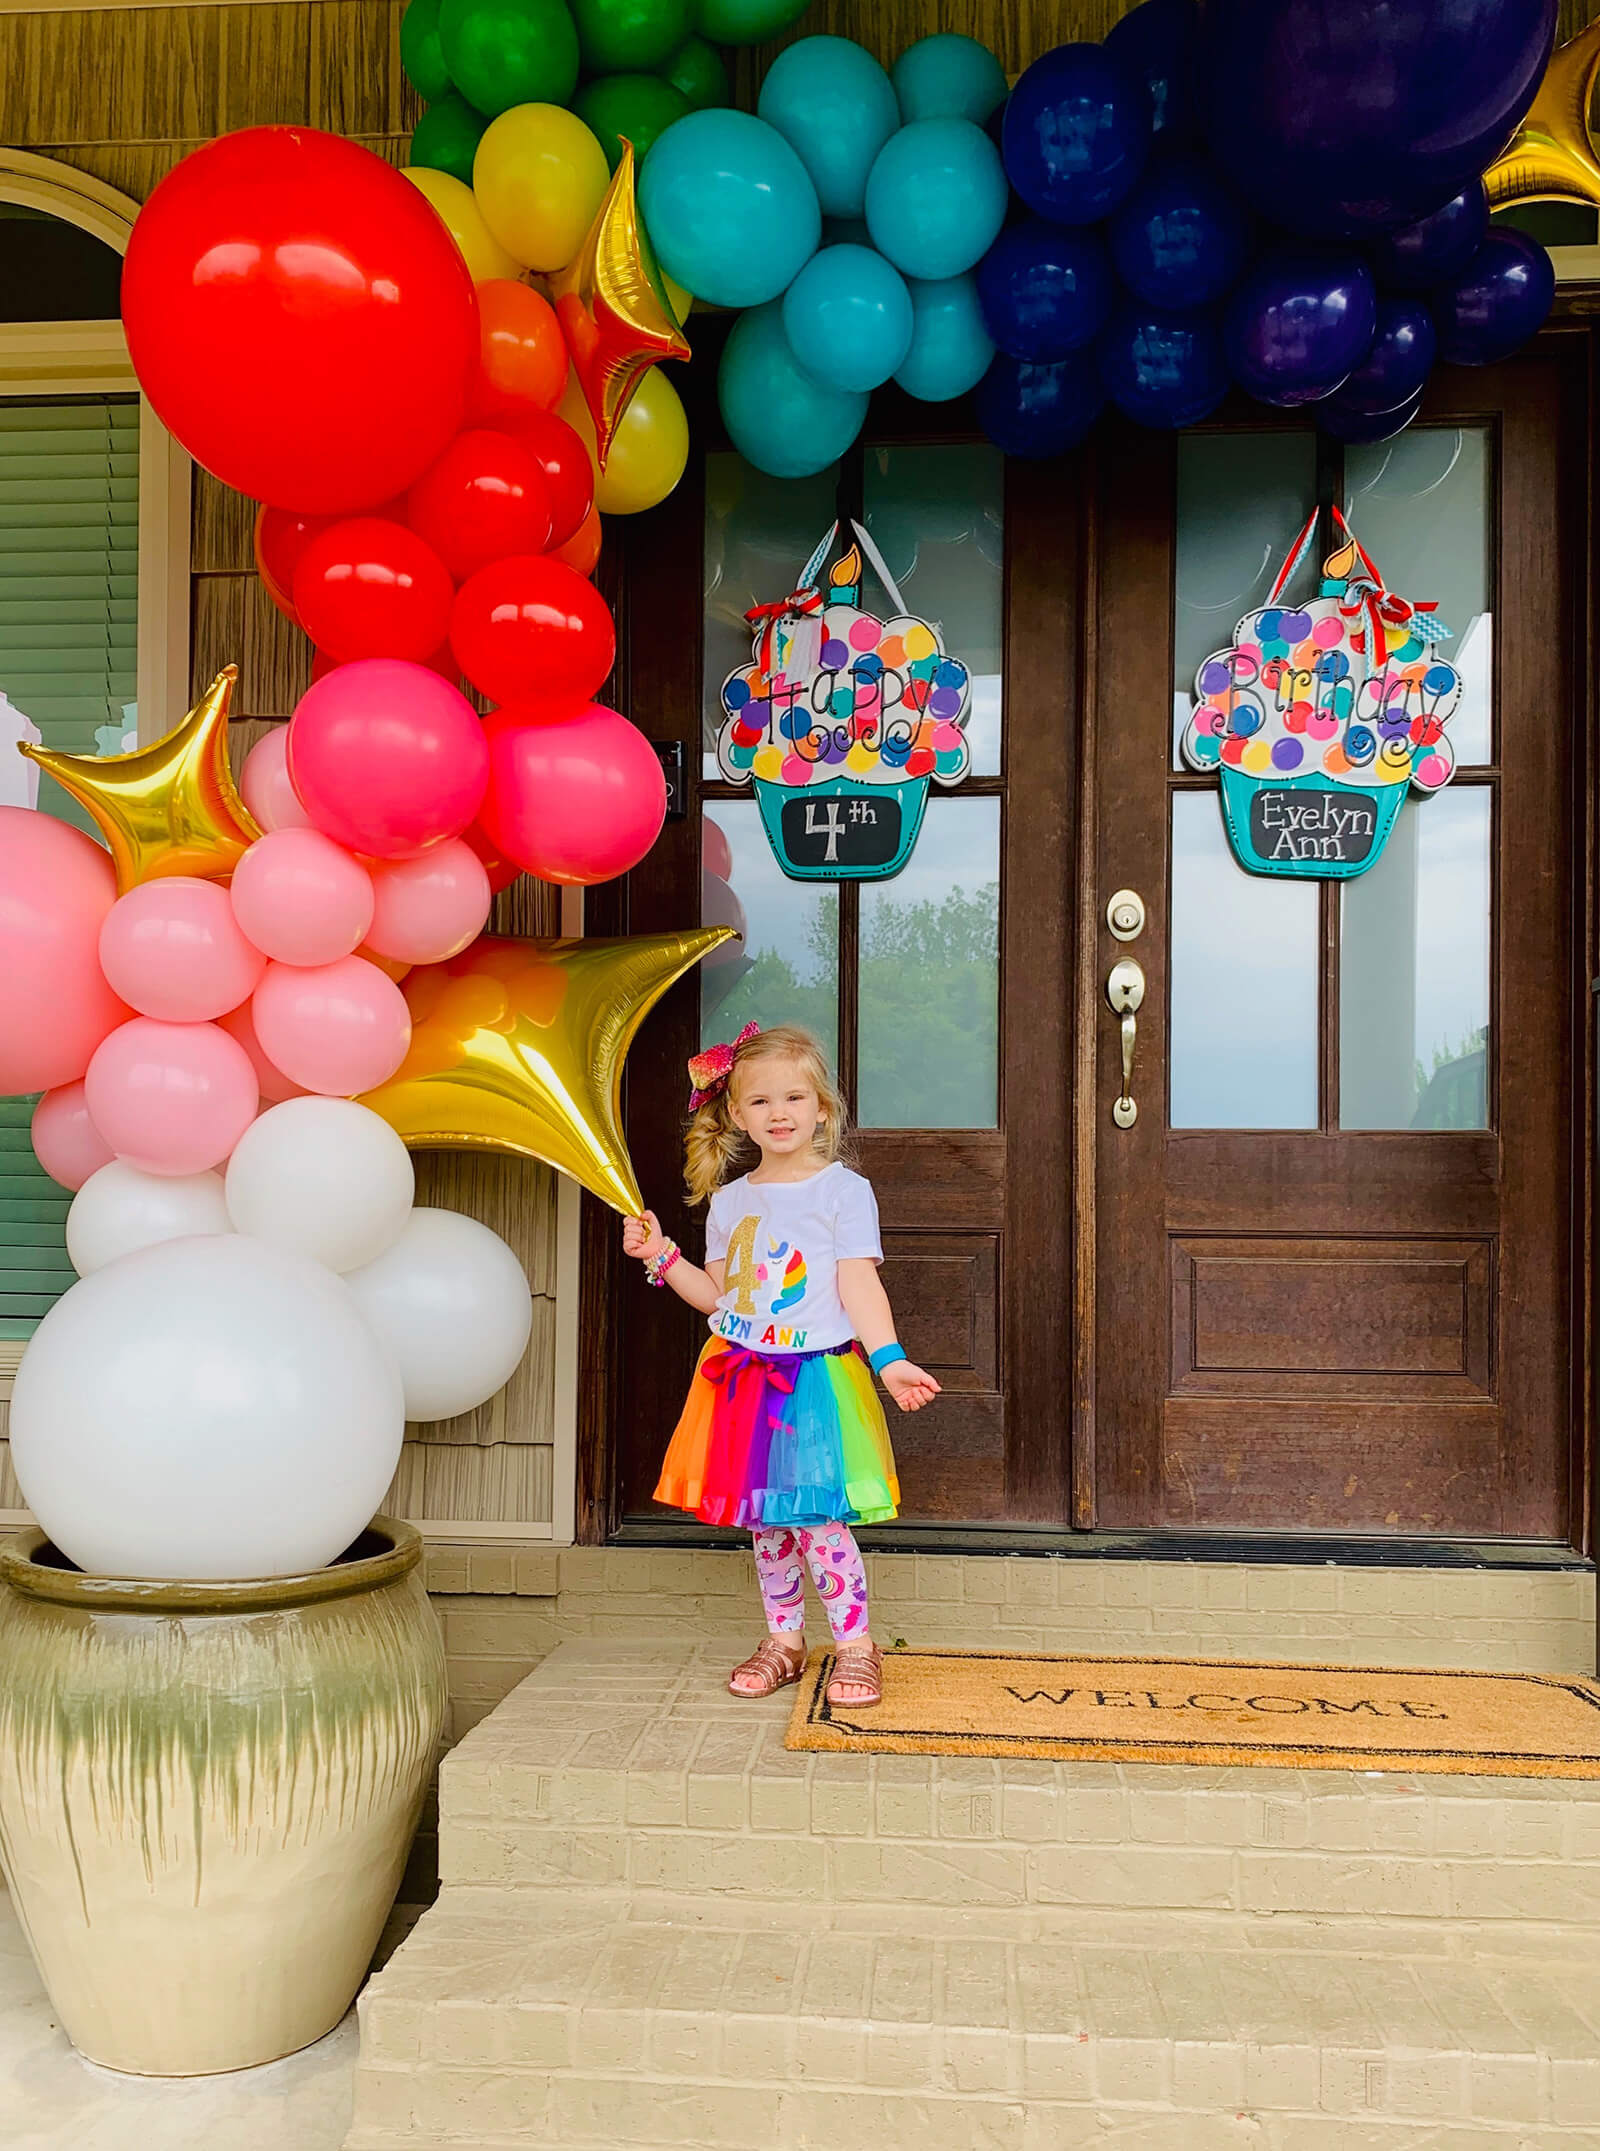 For this 4th birthday we made a rainbow front door display balloon arch installation - Just Peachy in Little Rock, Arkansas.